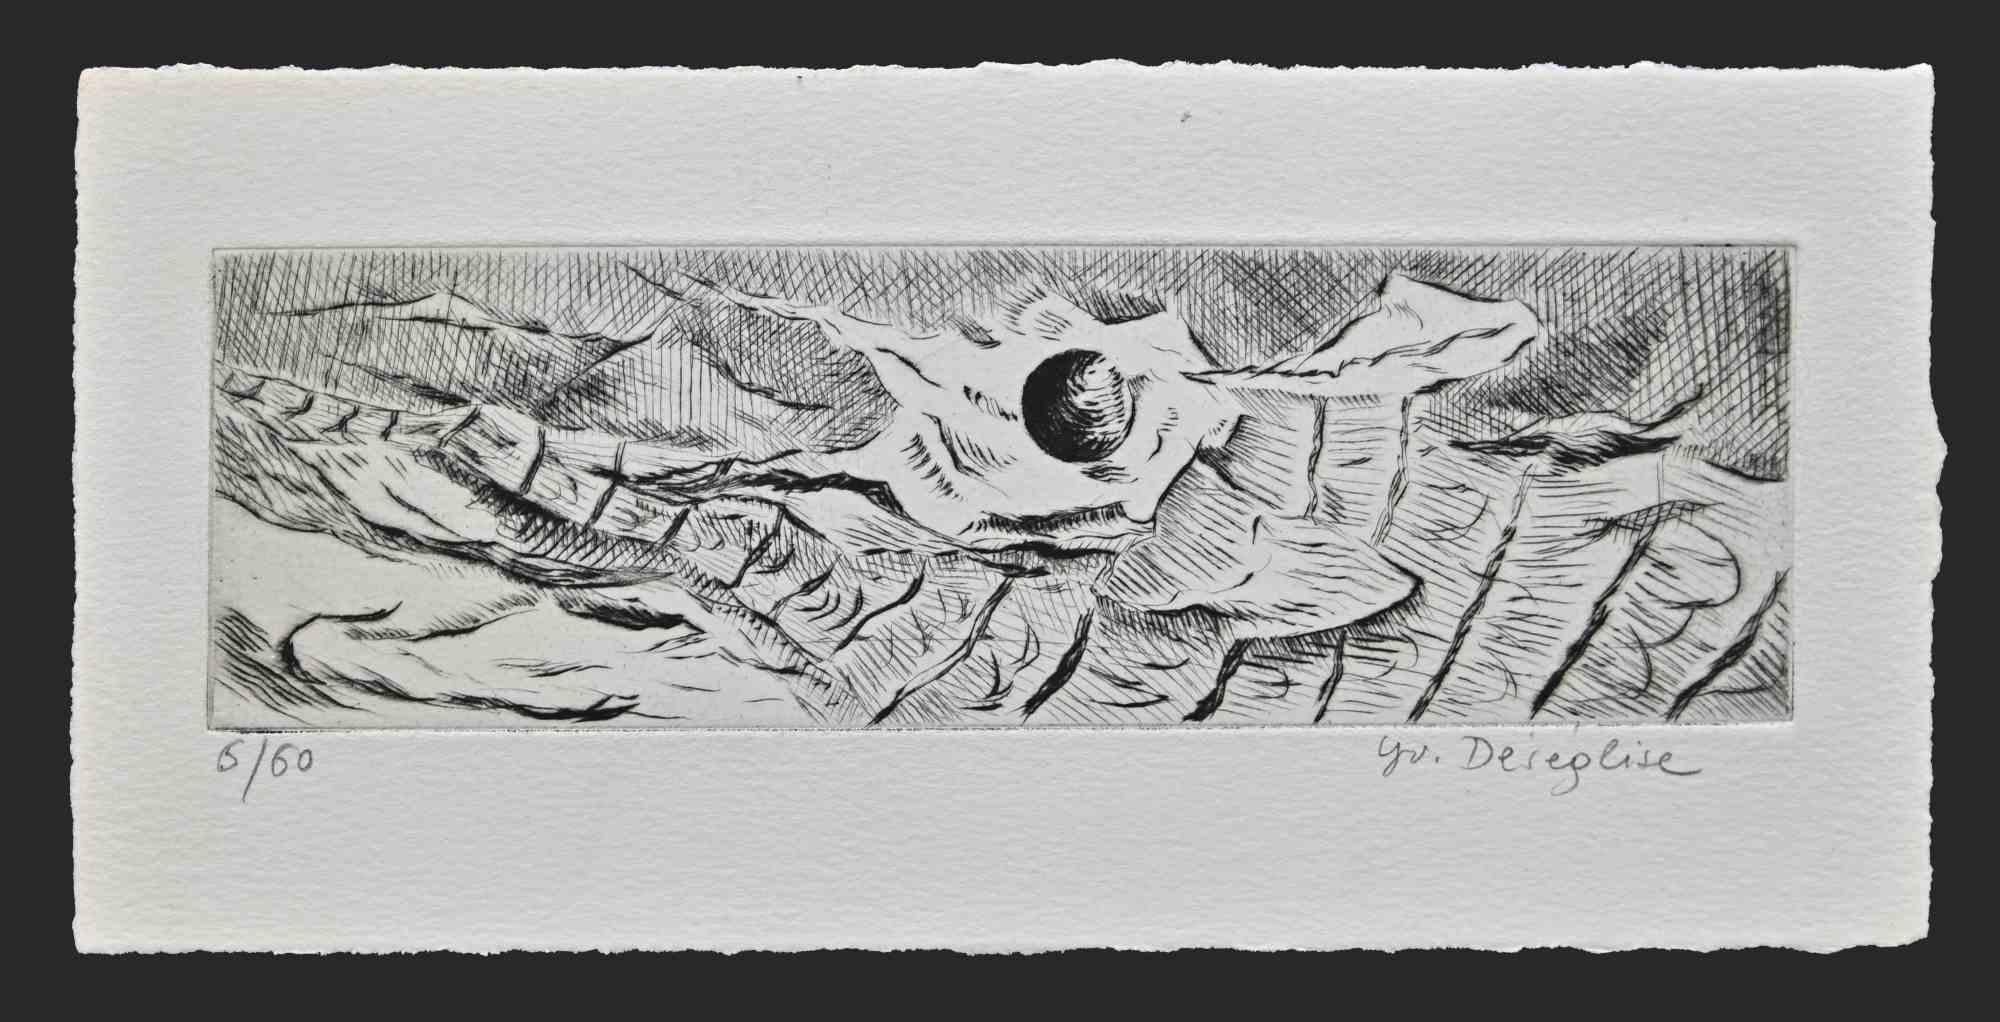 Blowing Wind is an etching on paper realized by Jeannette Deseglise in the 1950s.

Hand-signed and numbered, edition of 60 prints.

Very Good conditions.

The artwork is realized poetically through various rapid short strokes, expressively by